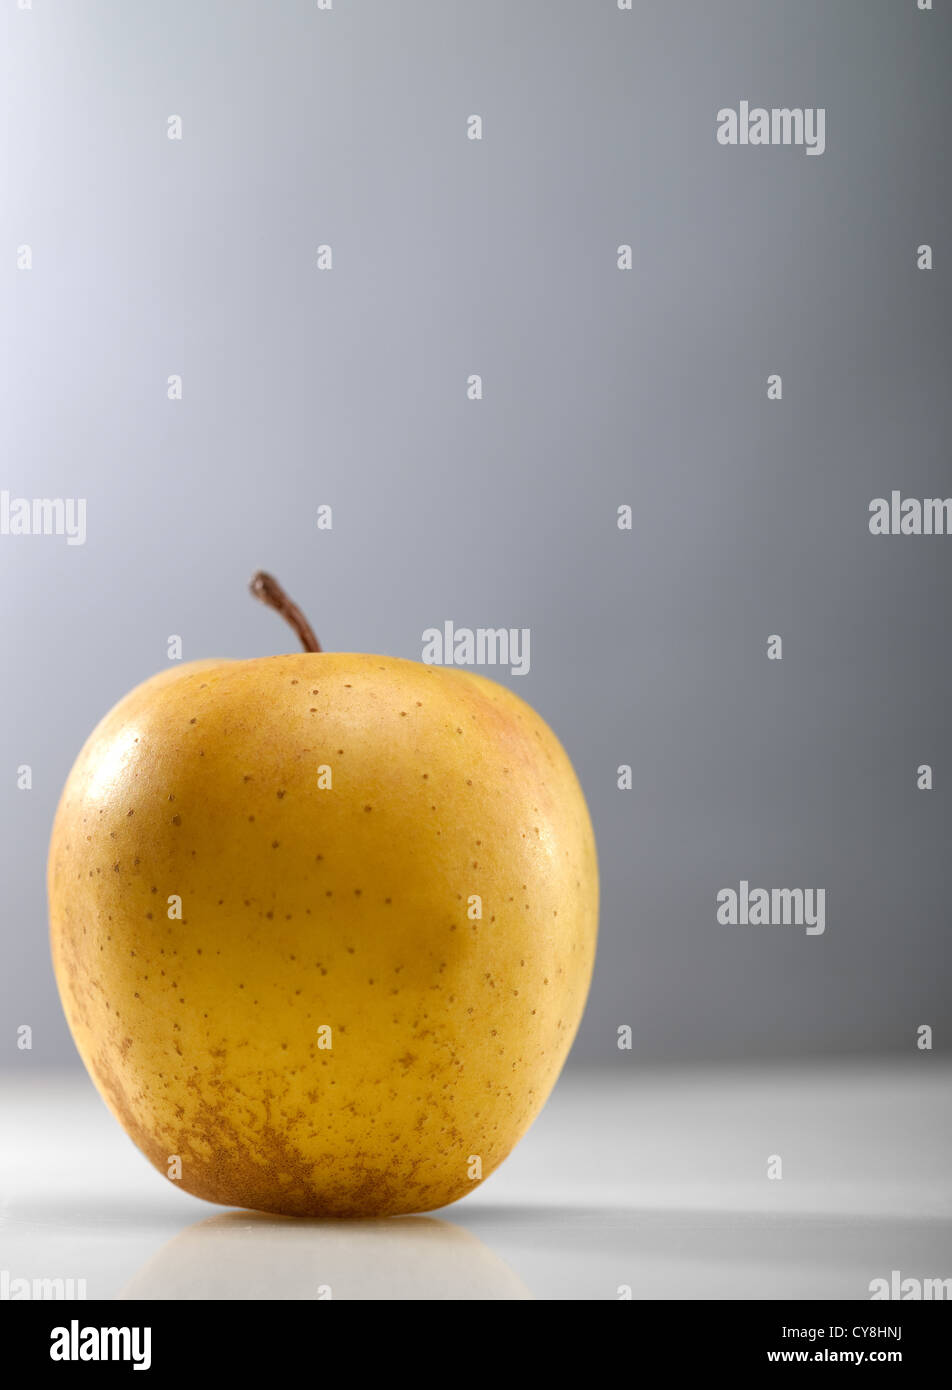 Golden apple over abstract gray backgrounds Stock Photo